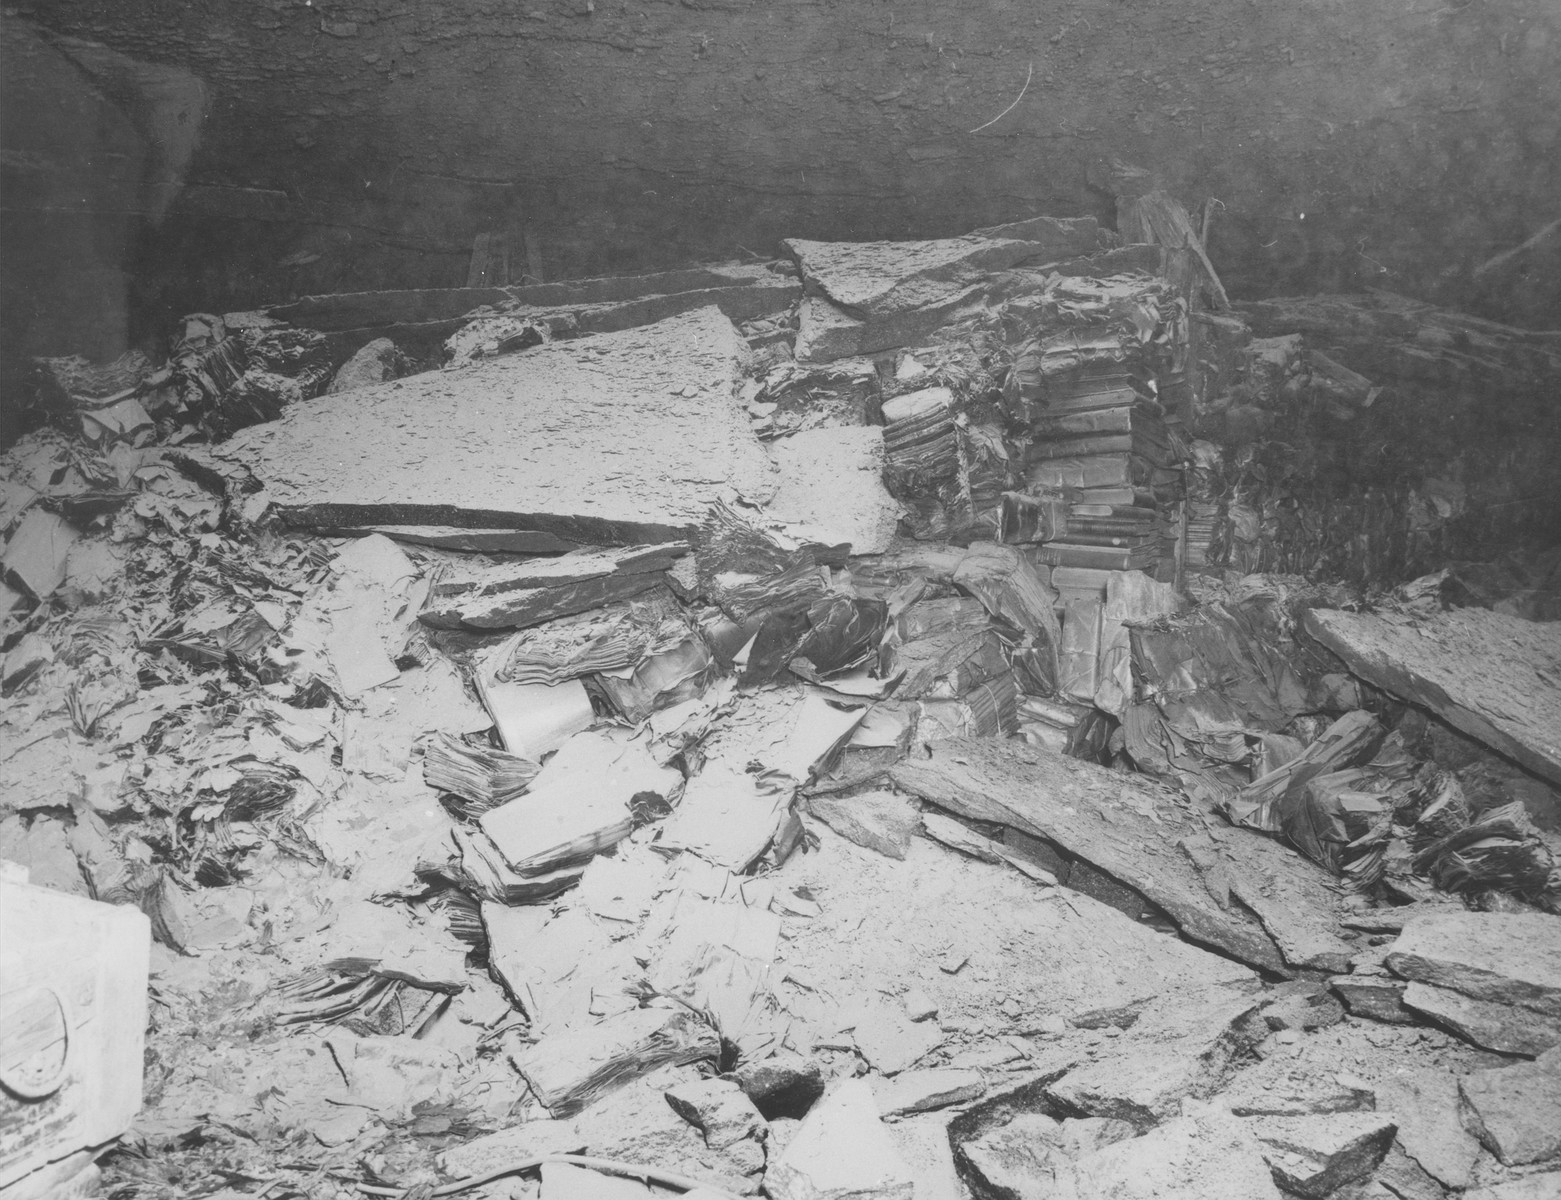 View of the charred remains of books from libraries in Berlin and Marburg that had been stored in a salt mine near Heimboldshausen, Germany.  

According to American military sources, the books were burned in the salt mines by displaced persons.